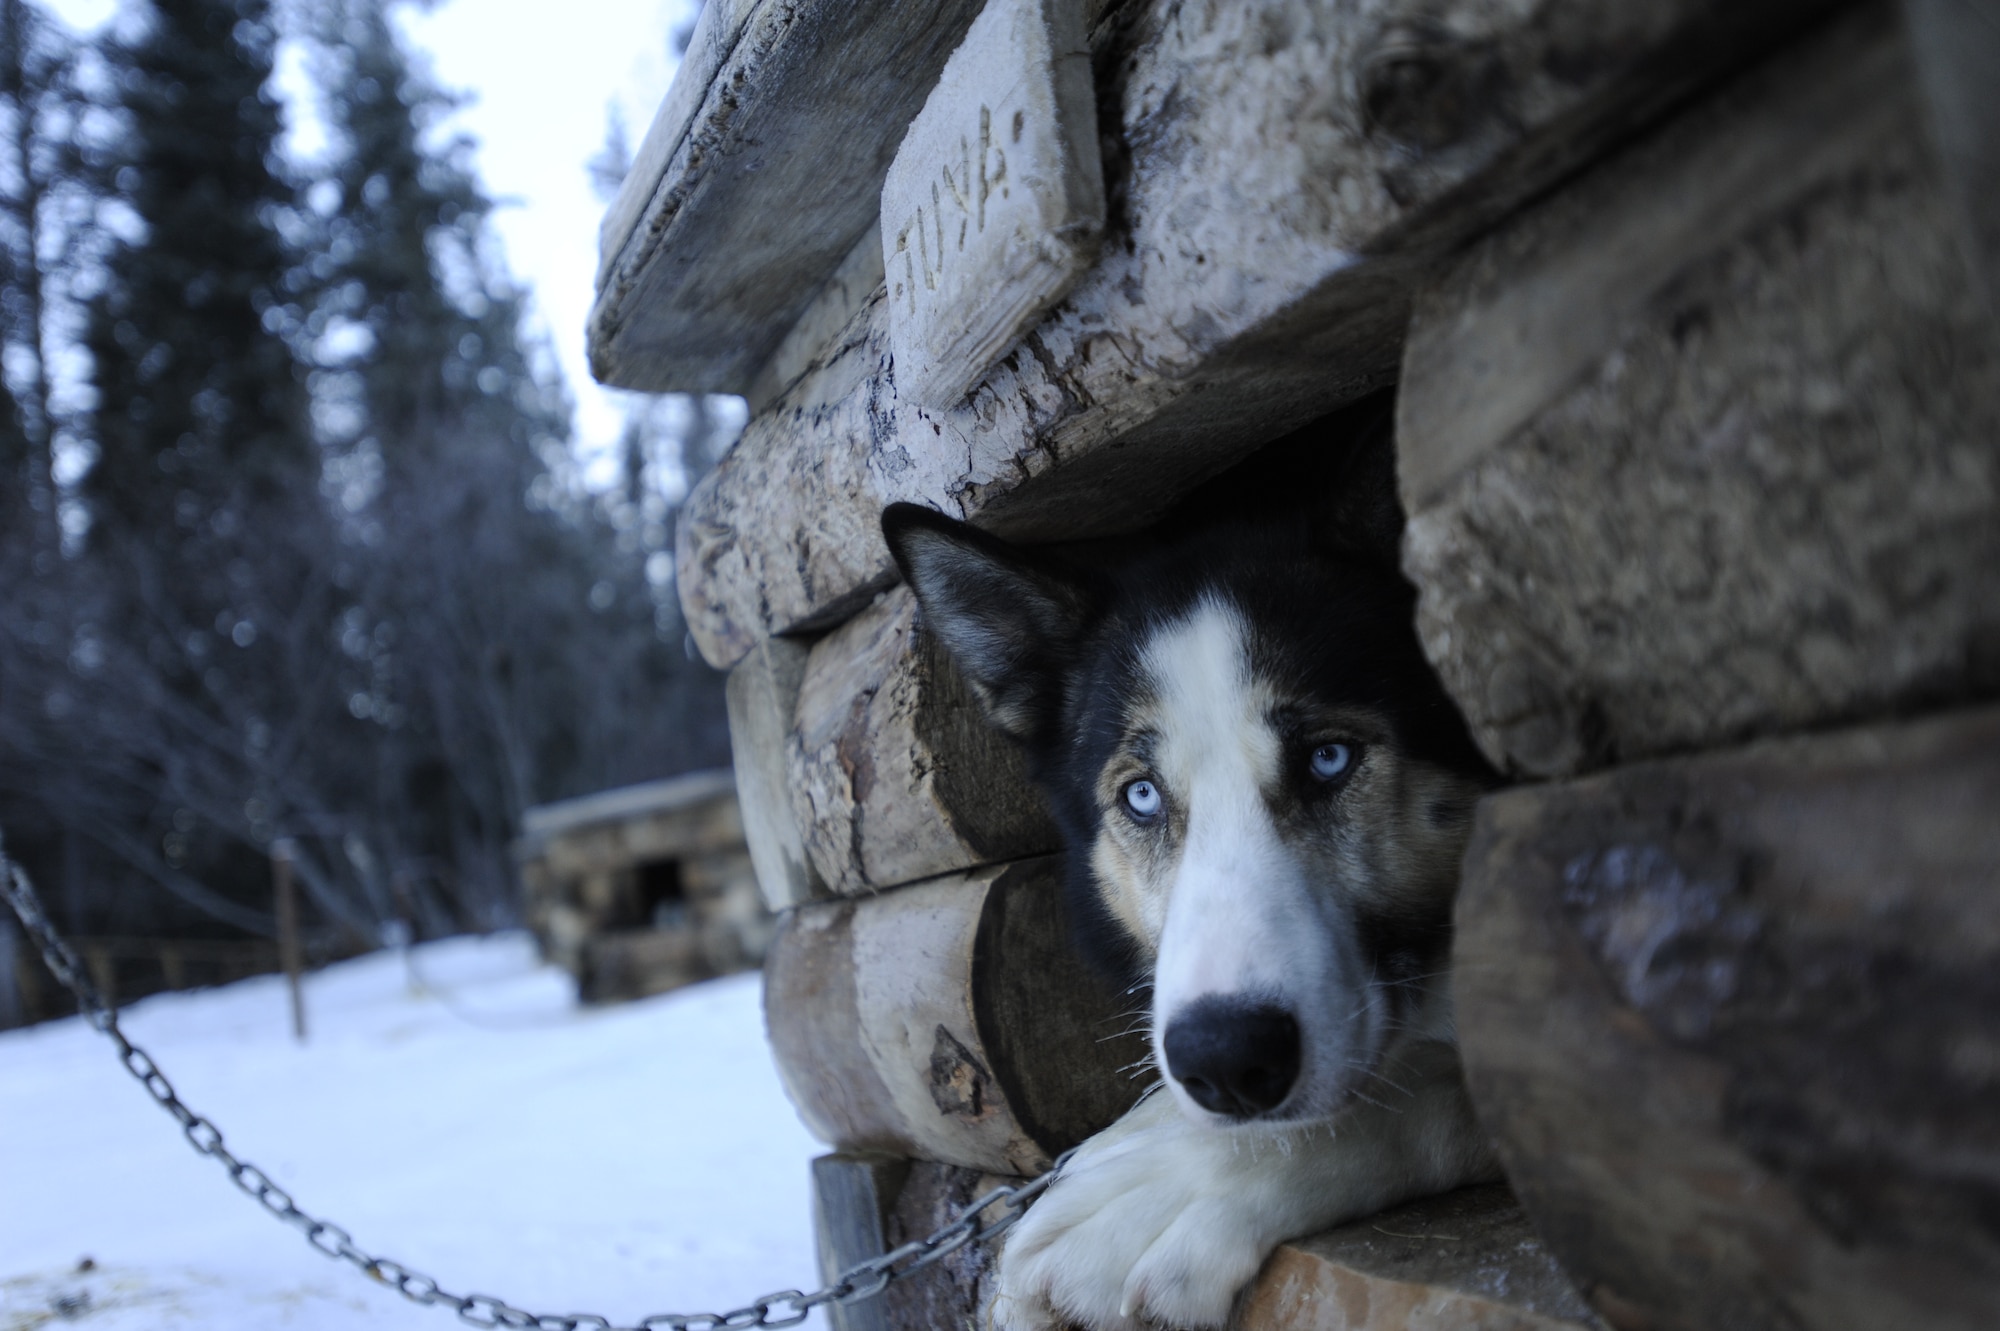 Tuya, a sled dog, rests in her doghouse after greeting a handful of park guests at Denali National Park, Alaska, Jan. 19, 2015. Denali National Park has nearly 30 sled dogs that patrol much of the park’s 6 million acres throughout the winter; visitors are encouraged to meet the dogs while the dogs are not on patrol. (U.S. Air Force photo by 1st Lt. Elias Zani/Released)